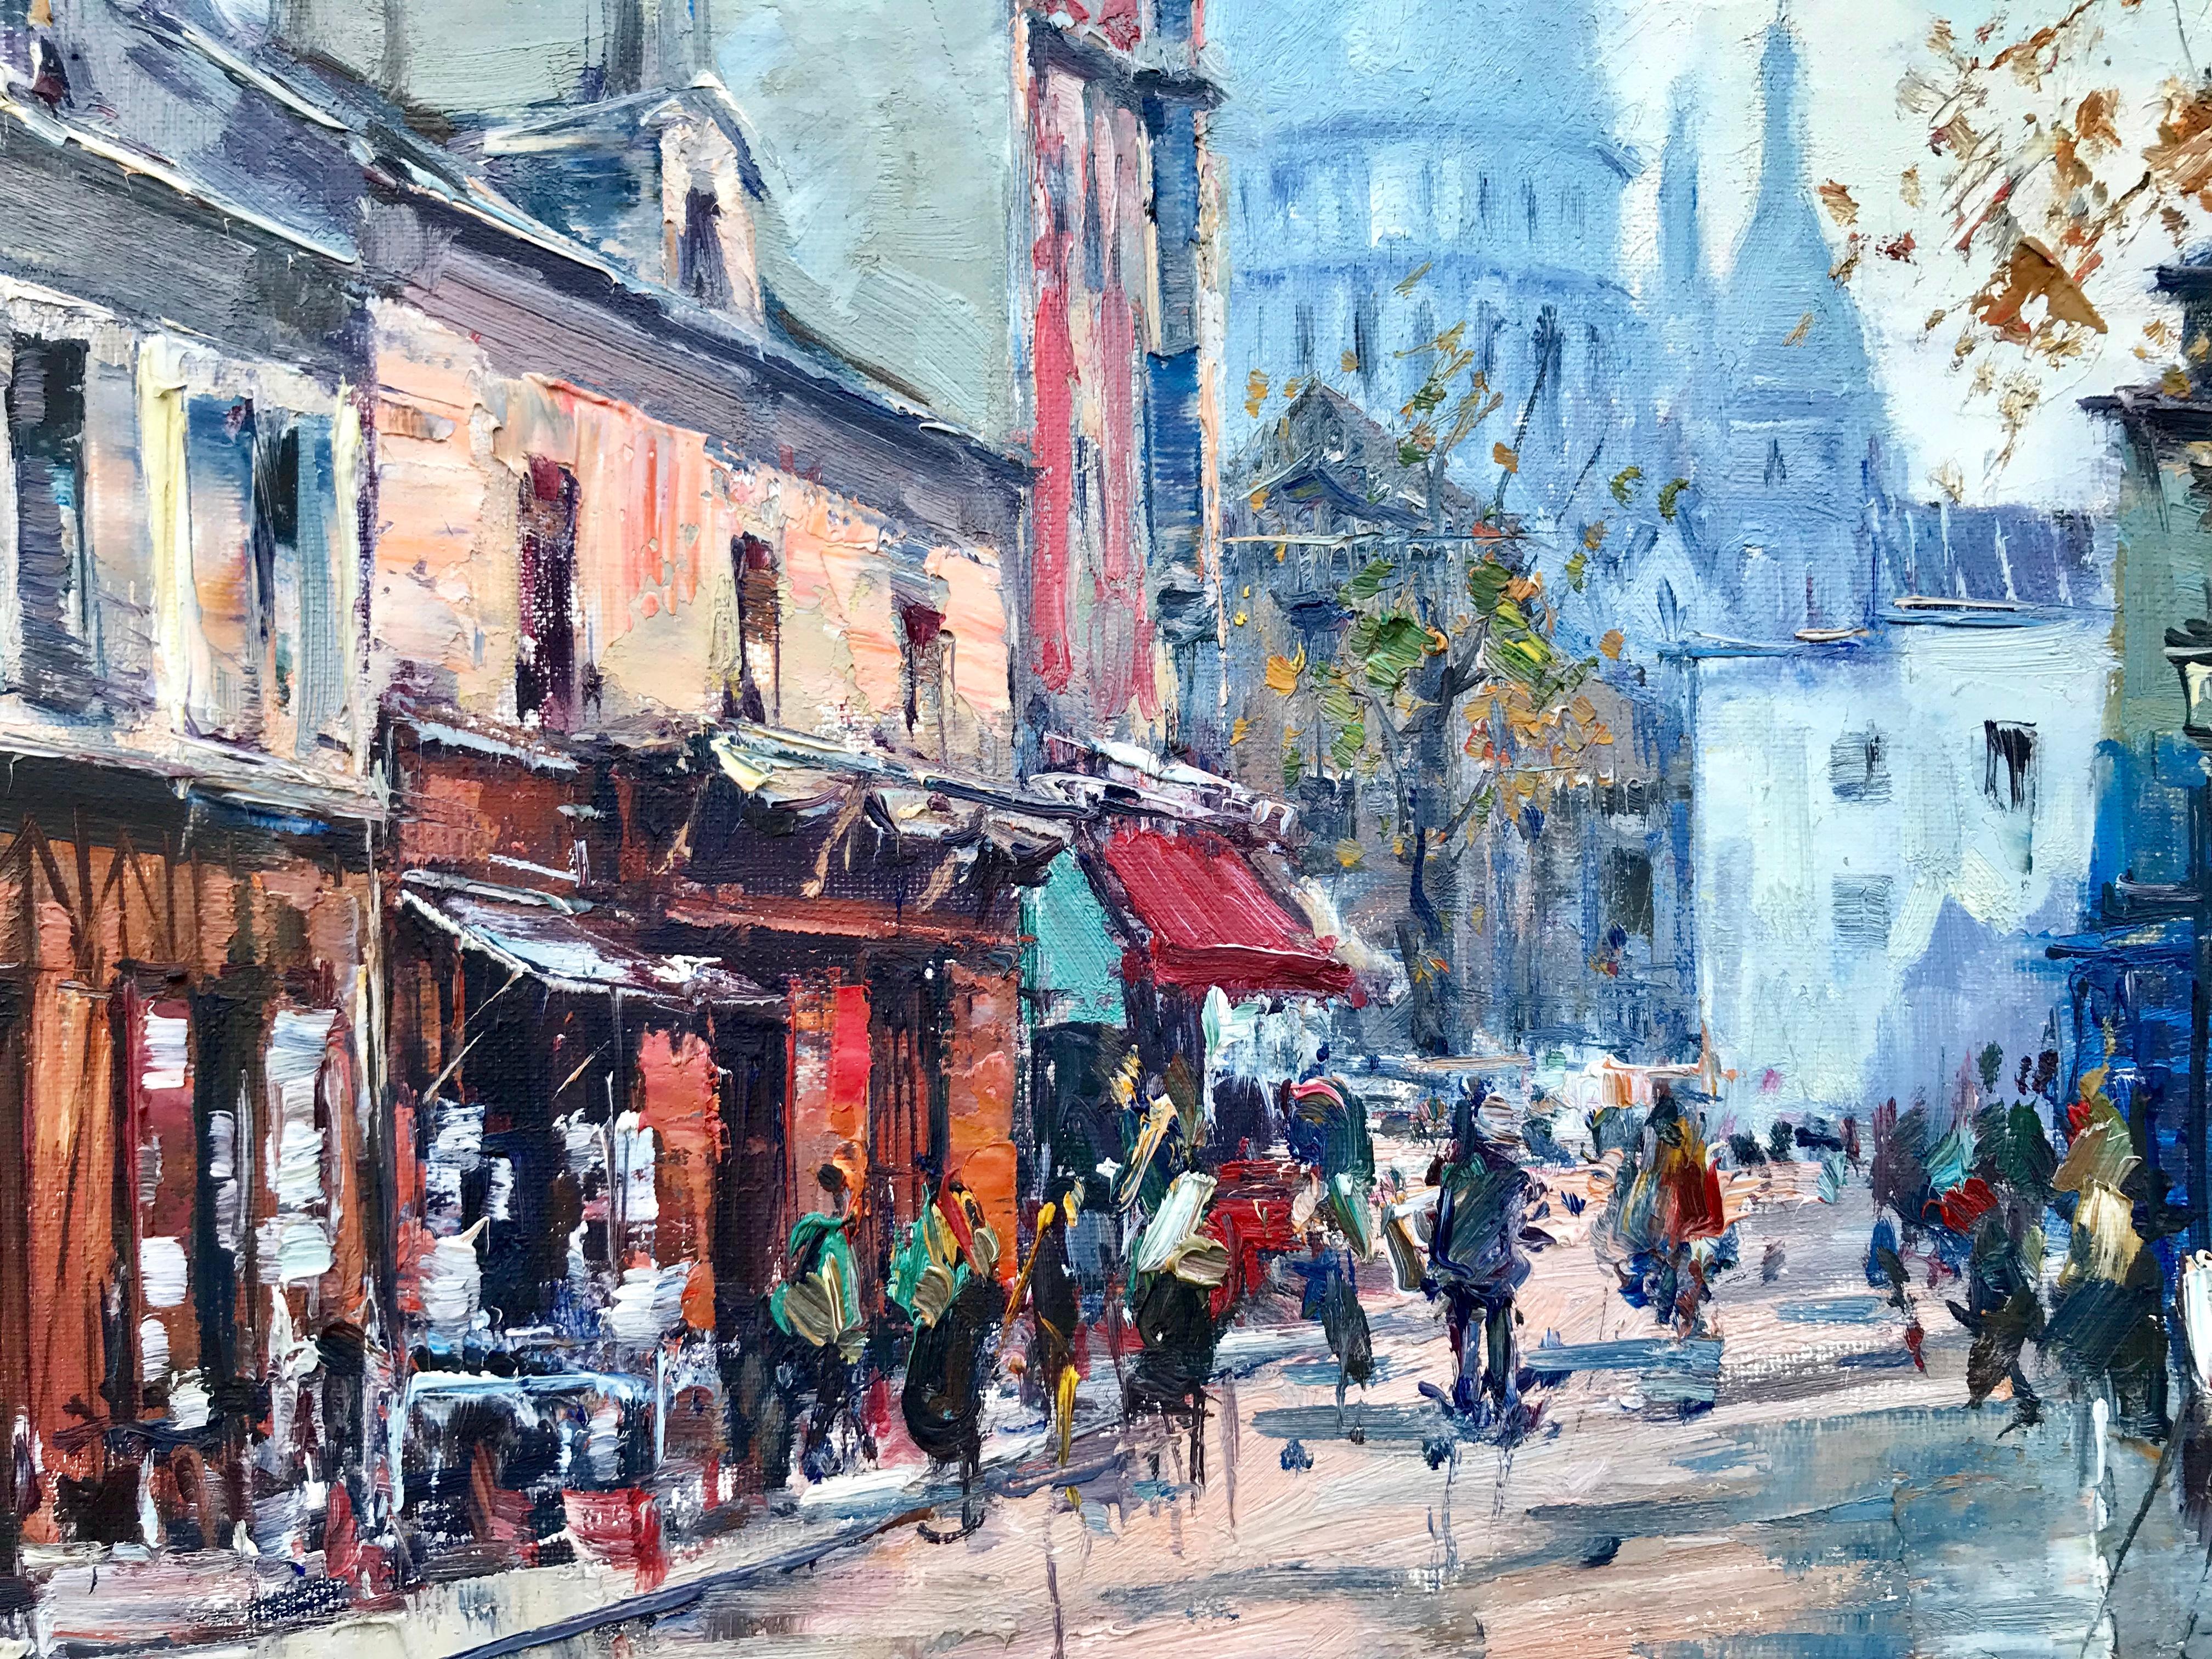 “View of Sacre Coeur” and Montmartre by the well known French artist, Jean Salabet.  Signed lower right and dated 1952. In very good to excellent original condition.  It has its original period frame of carved wood with a grey wash. Overall 18.5 by